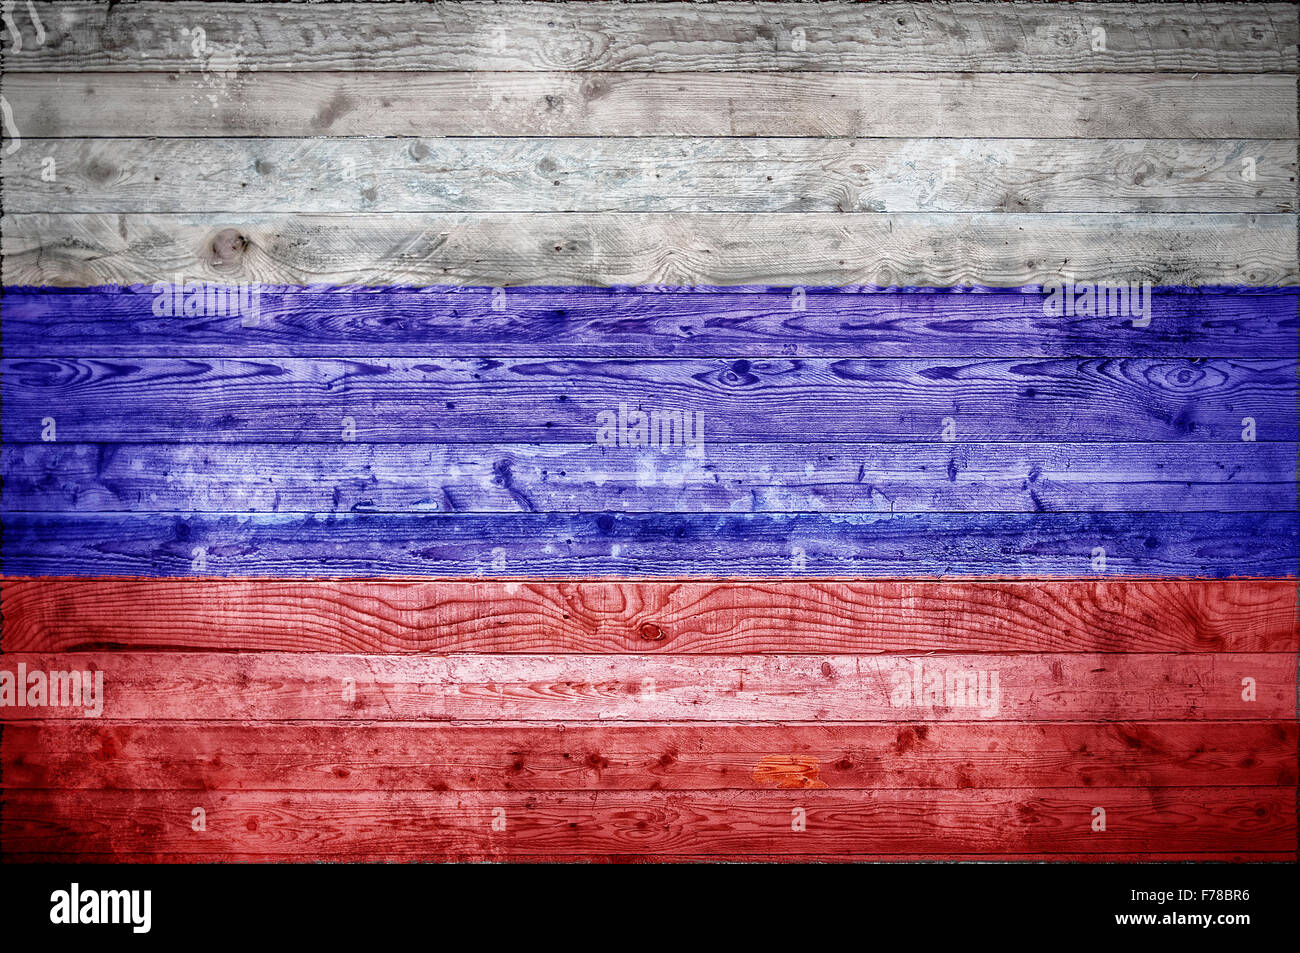 A vignetted background image of the flag of Russian Federation onto wooden boards of a wall or floor. Stock Photo